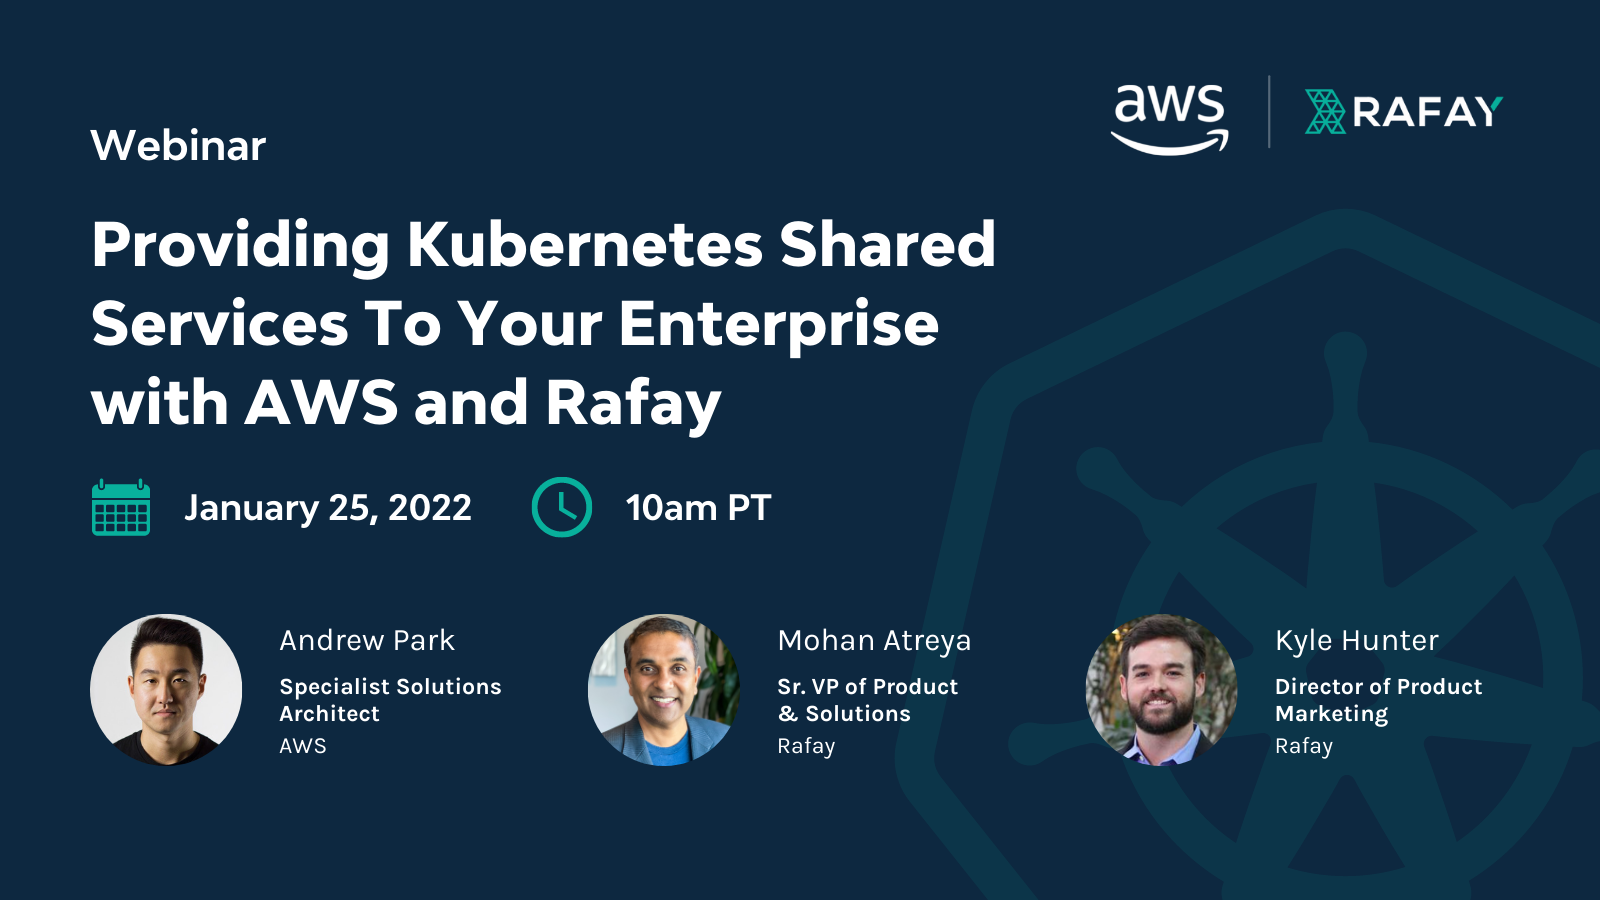 image for How to Provide Kubernetes Shared Services with AWS and Rafay